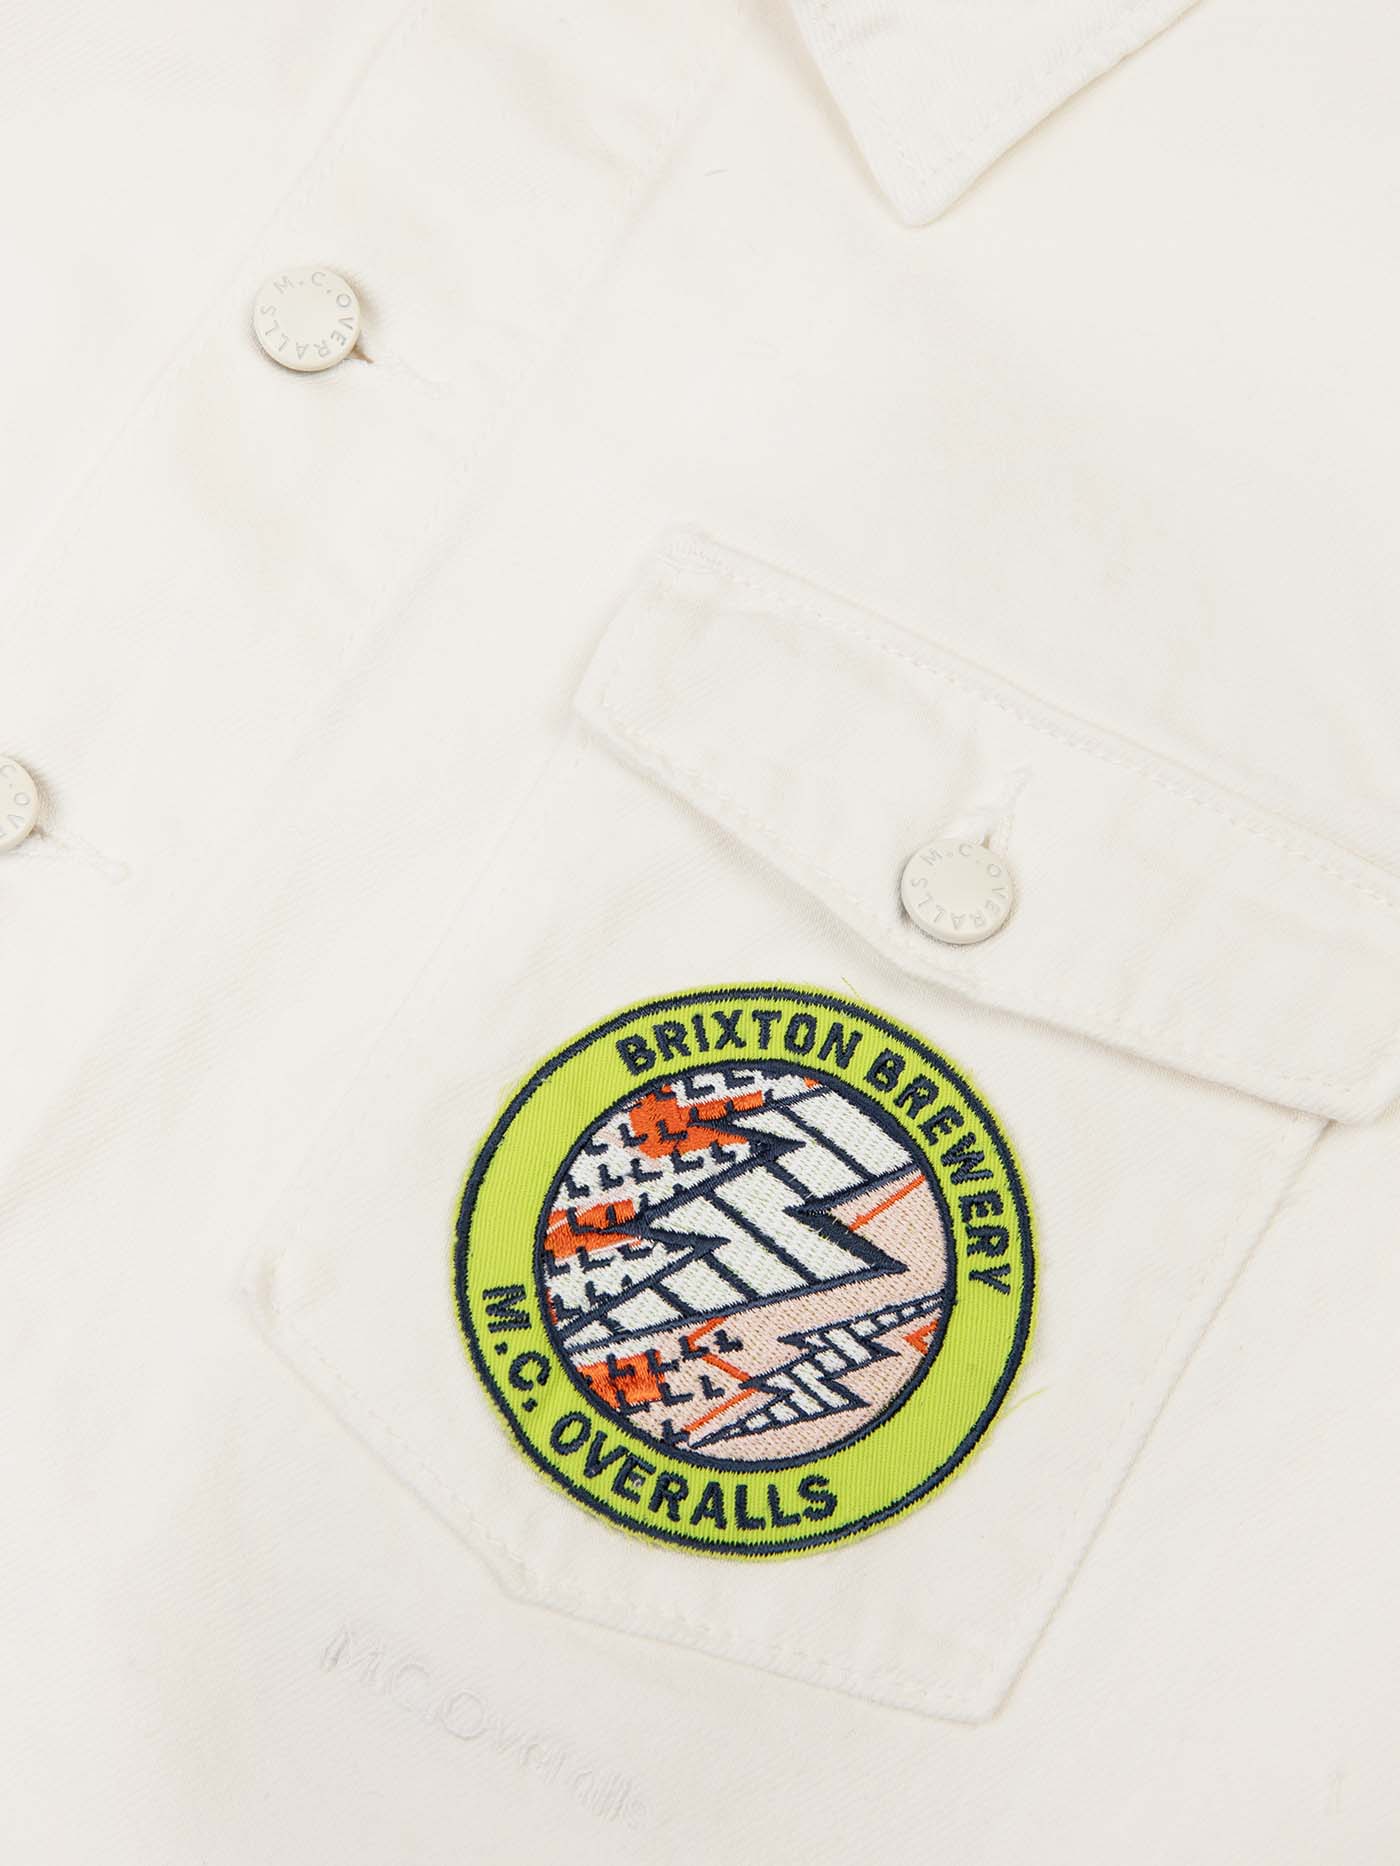 Brixton Brewery x M.C.Overalls Patch Round